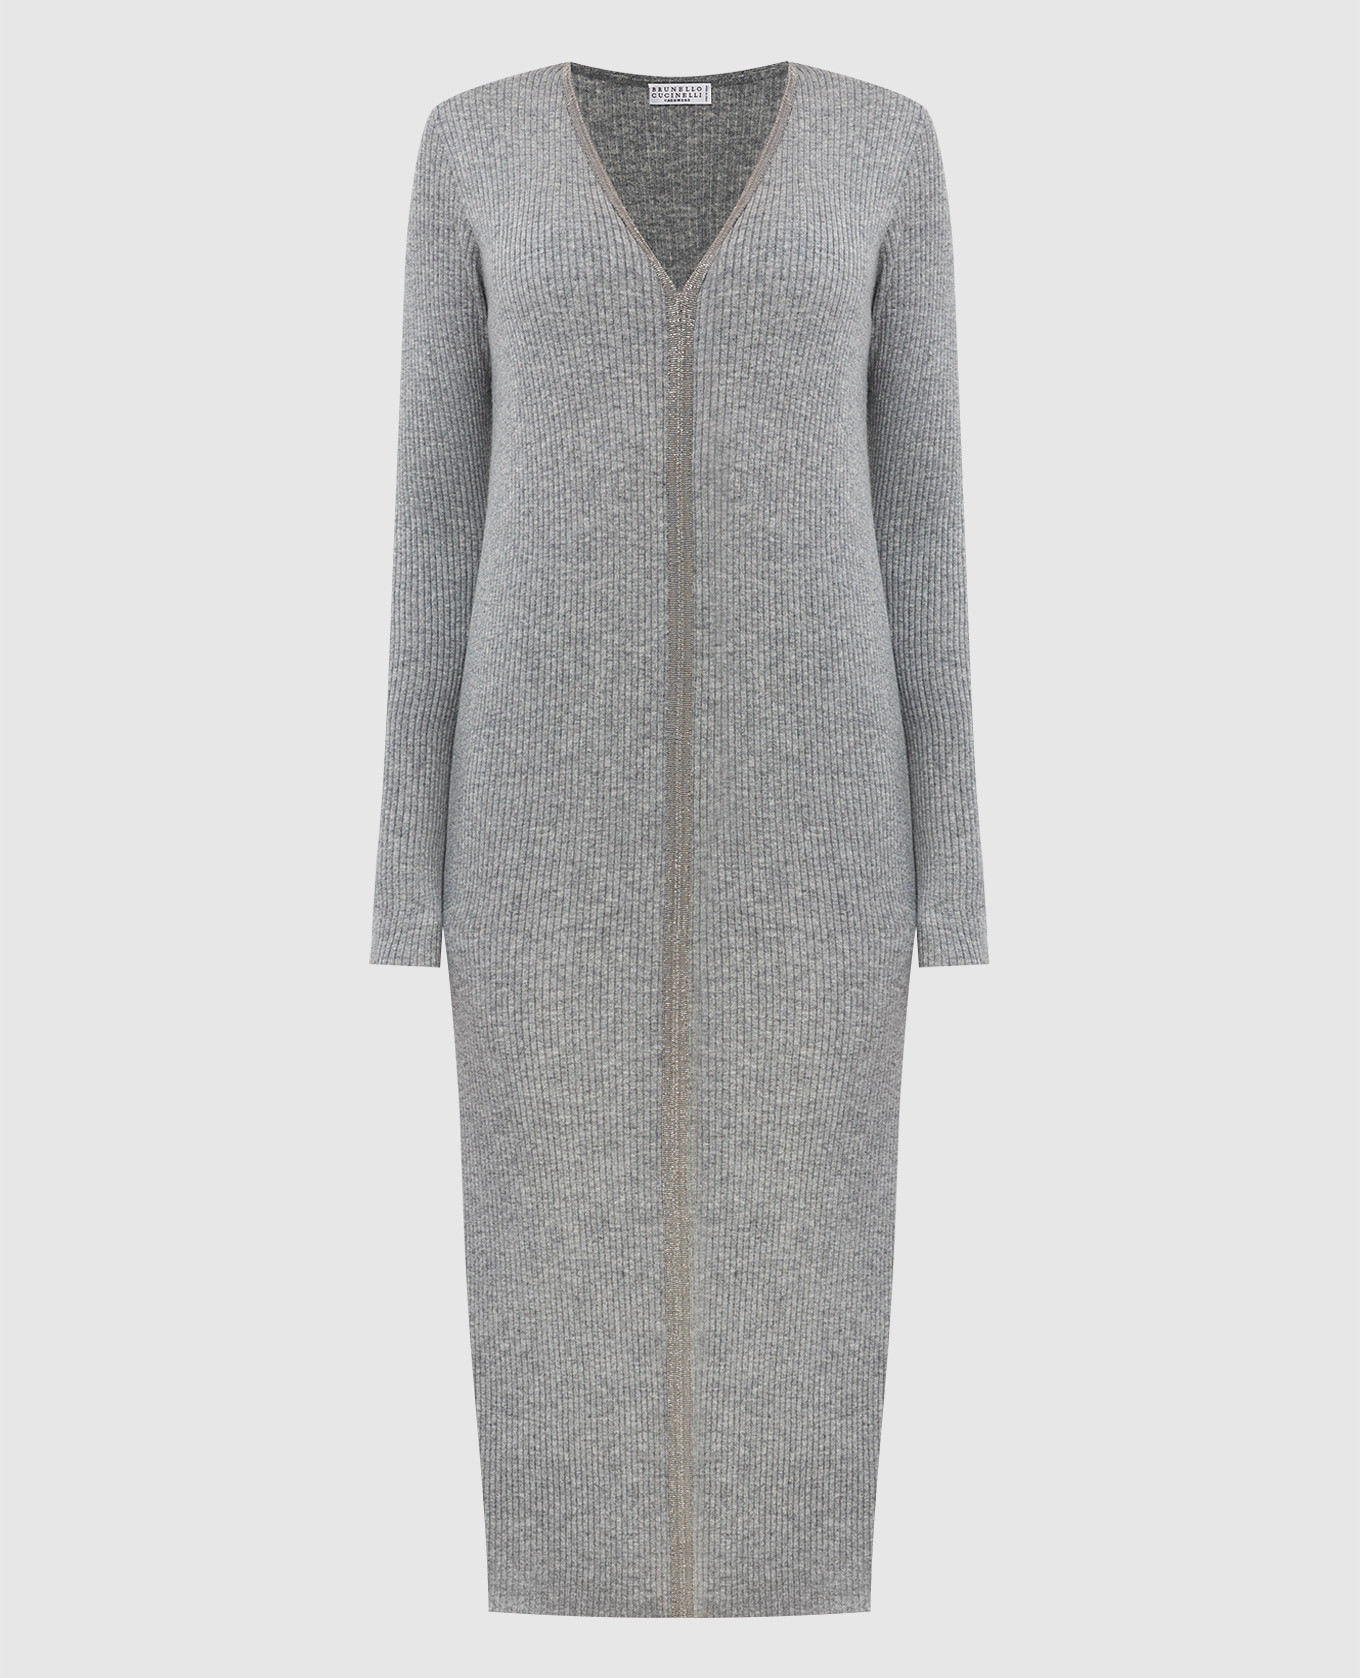 Light gray cashmere dress with chains